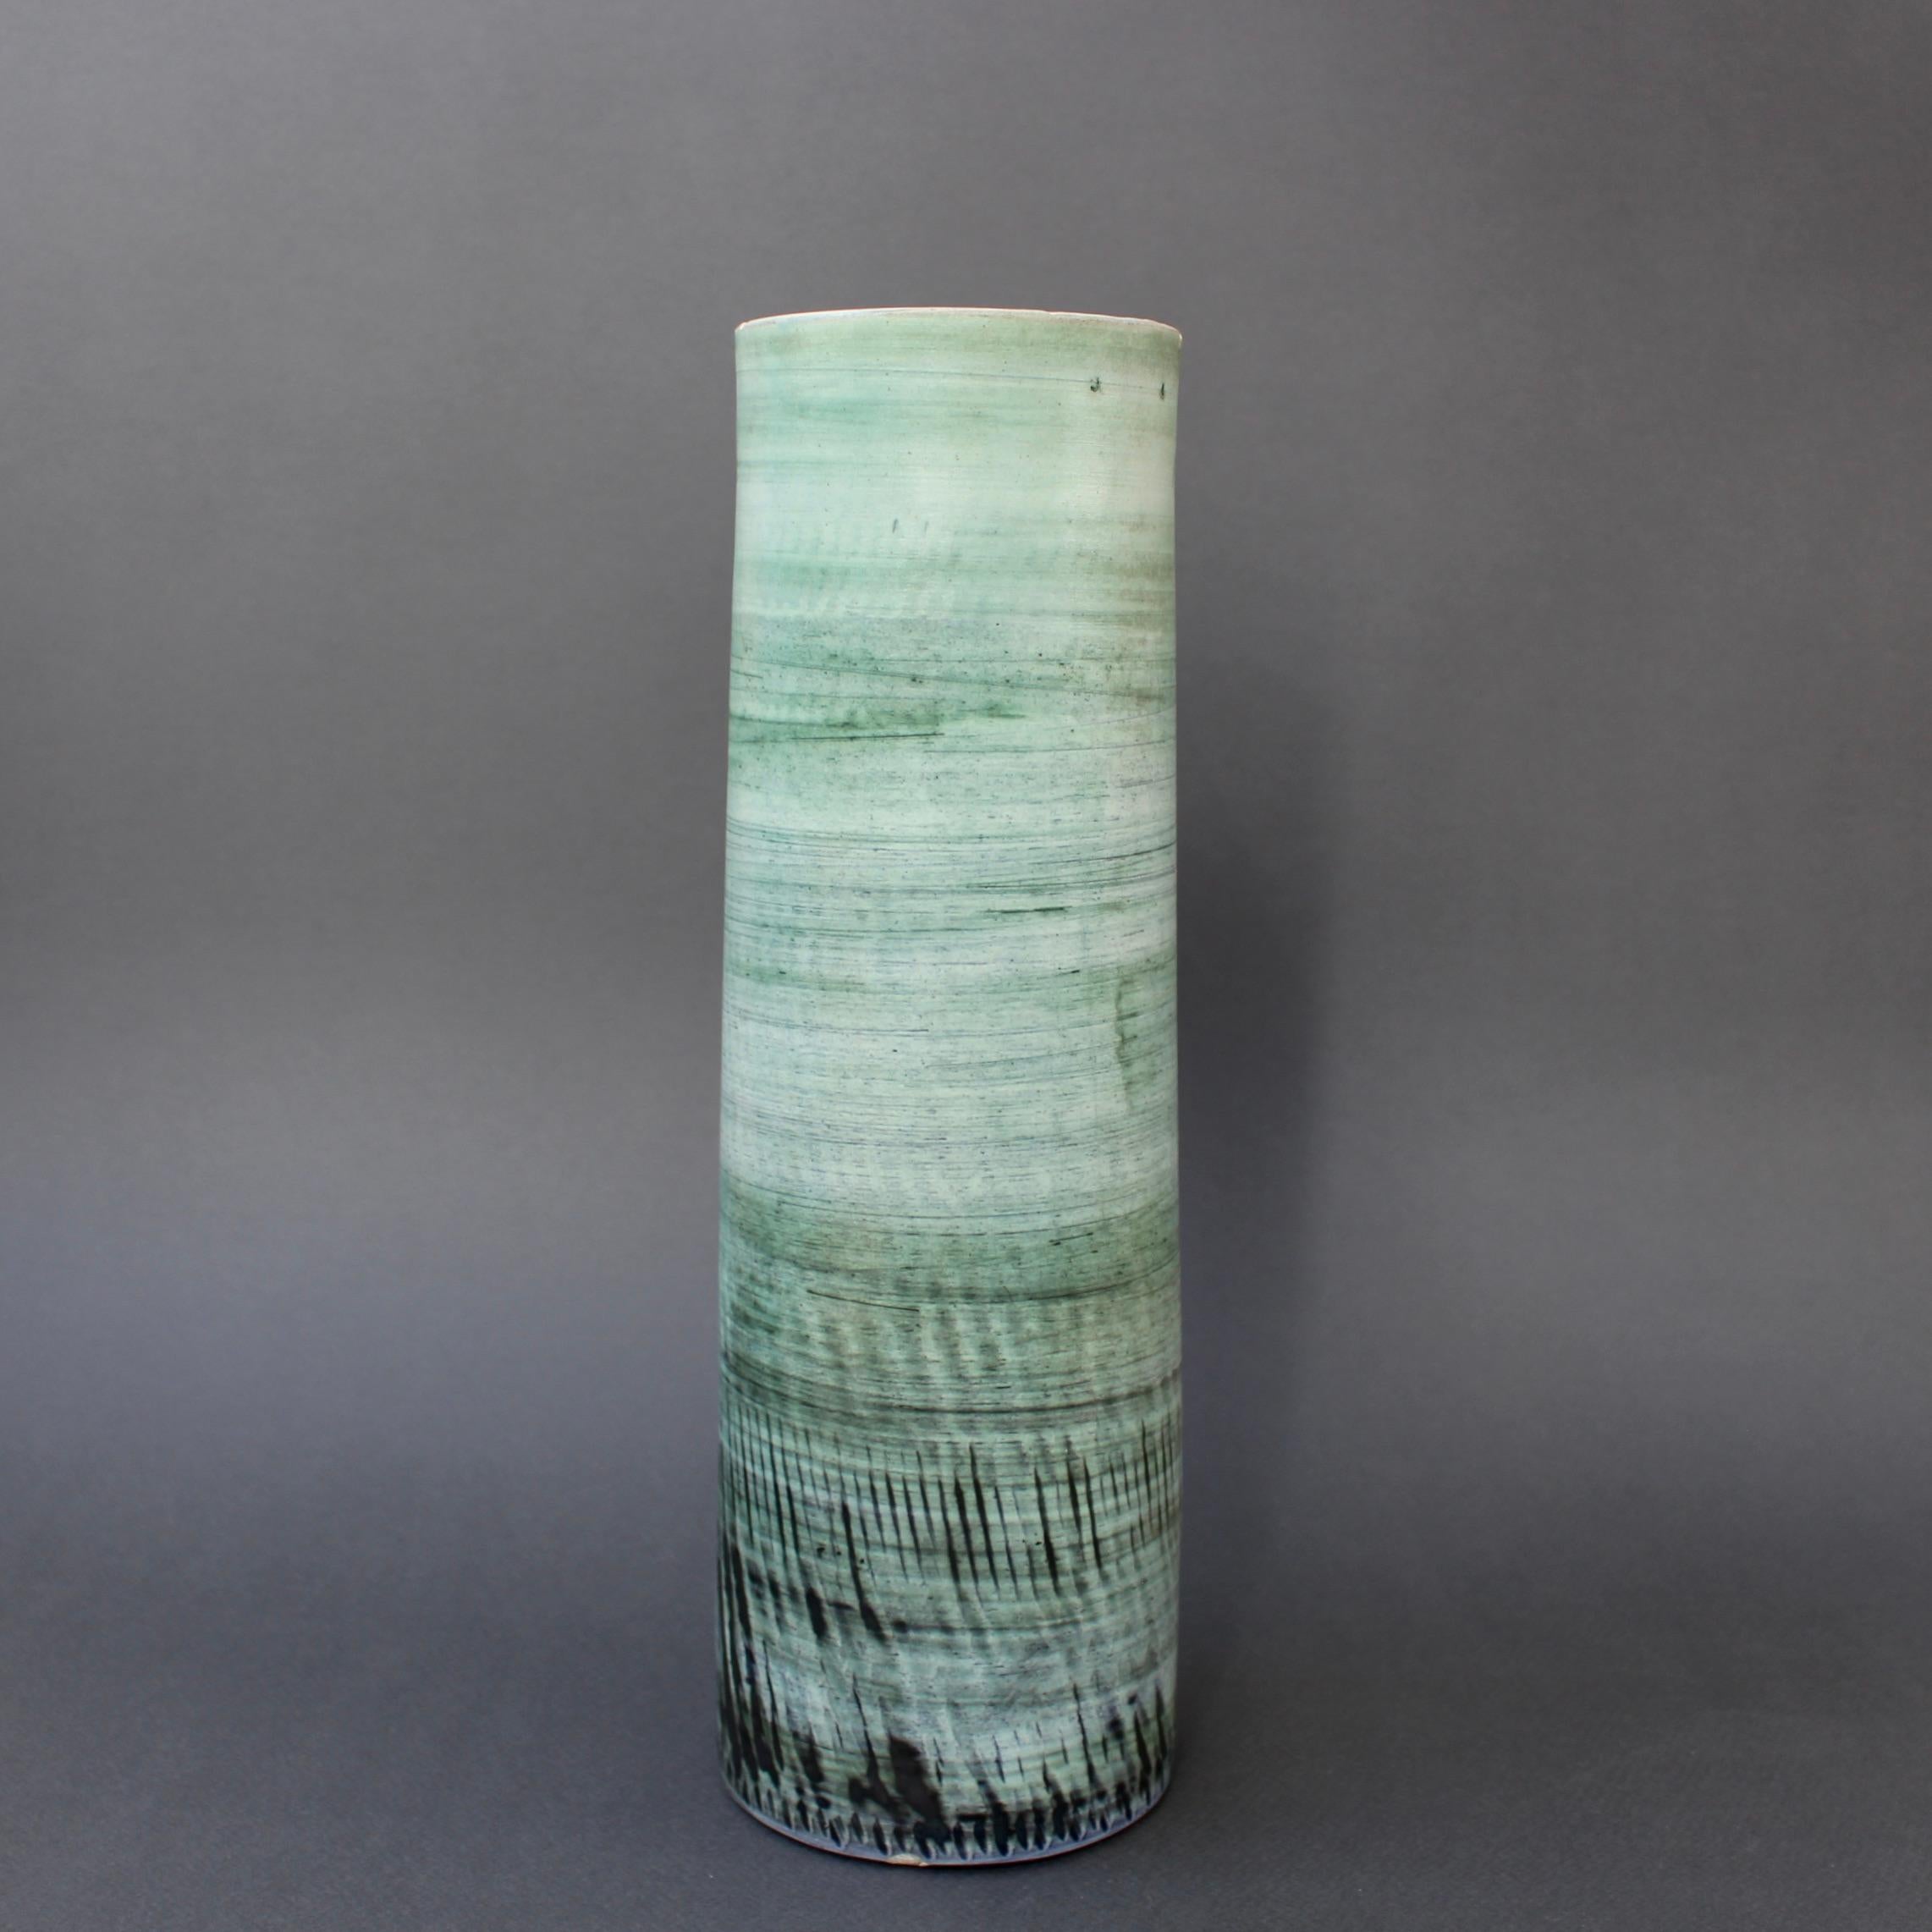 Mid-century French ceramic vase by Tapis Vert (circa 1960s). Elegant, graceful and sophisticated, this is a wonderful piece of subtle hue and masterful craftsmanship. The horizontal lines formed from the potter's throwing are reminiscent of a misty